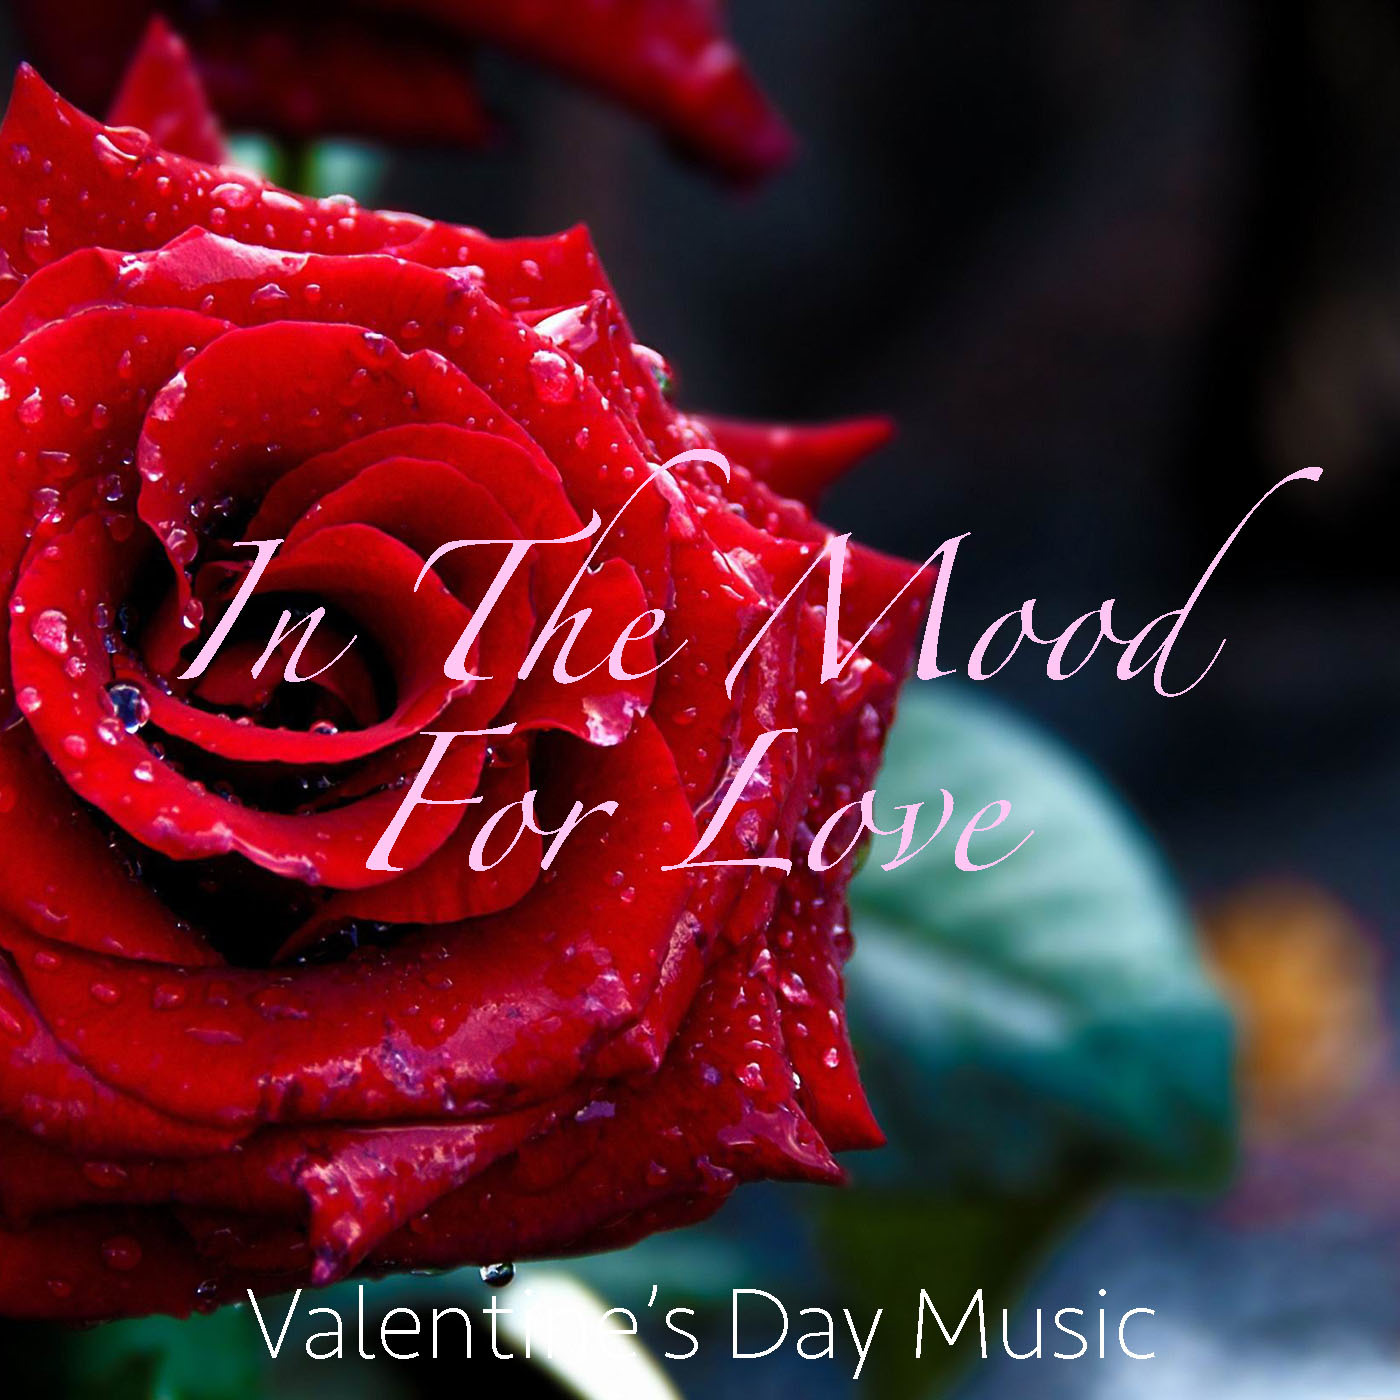 In The Mood For Love: Valentine's Day Music